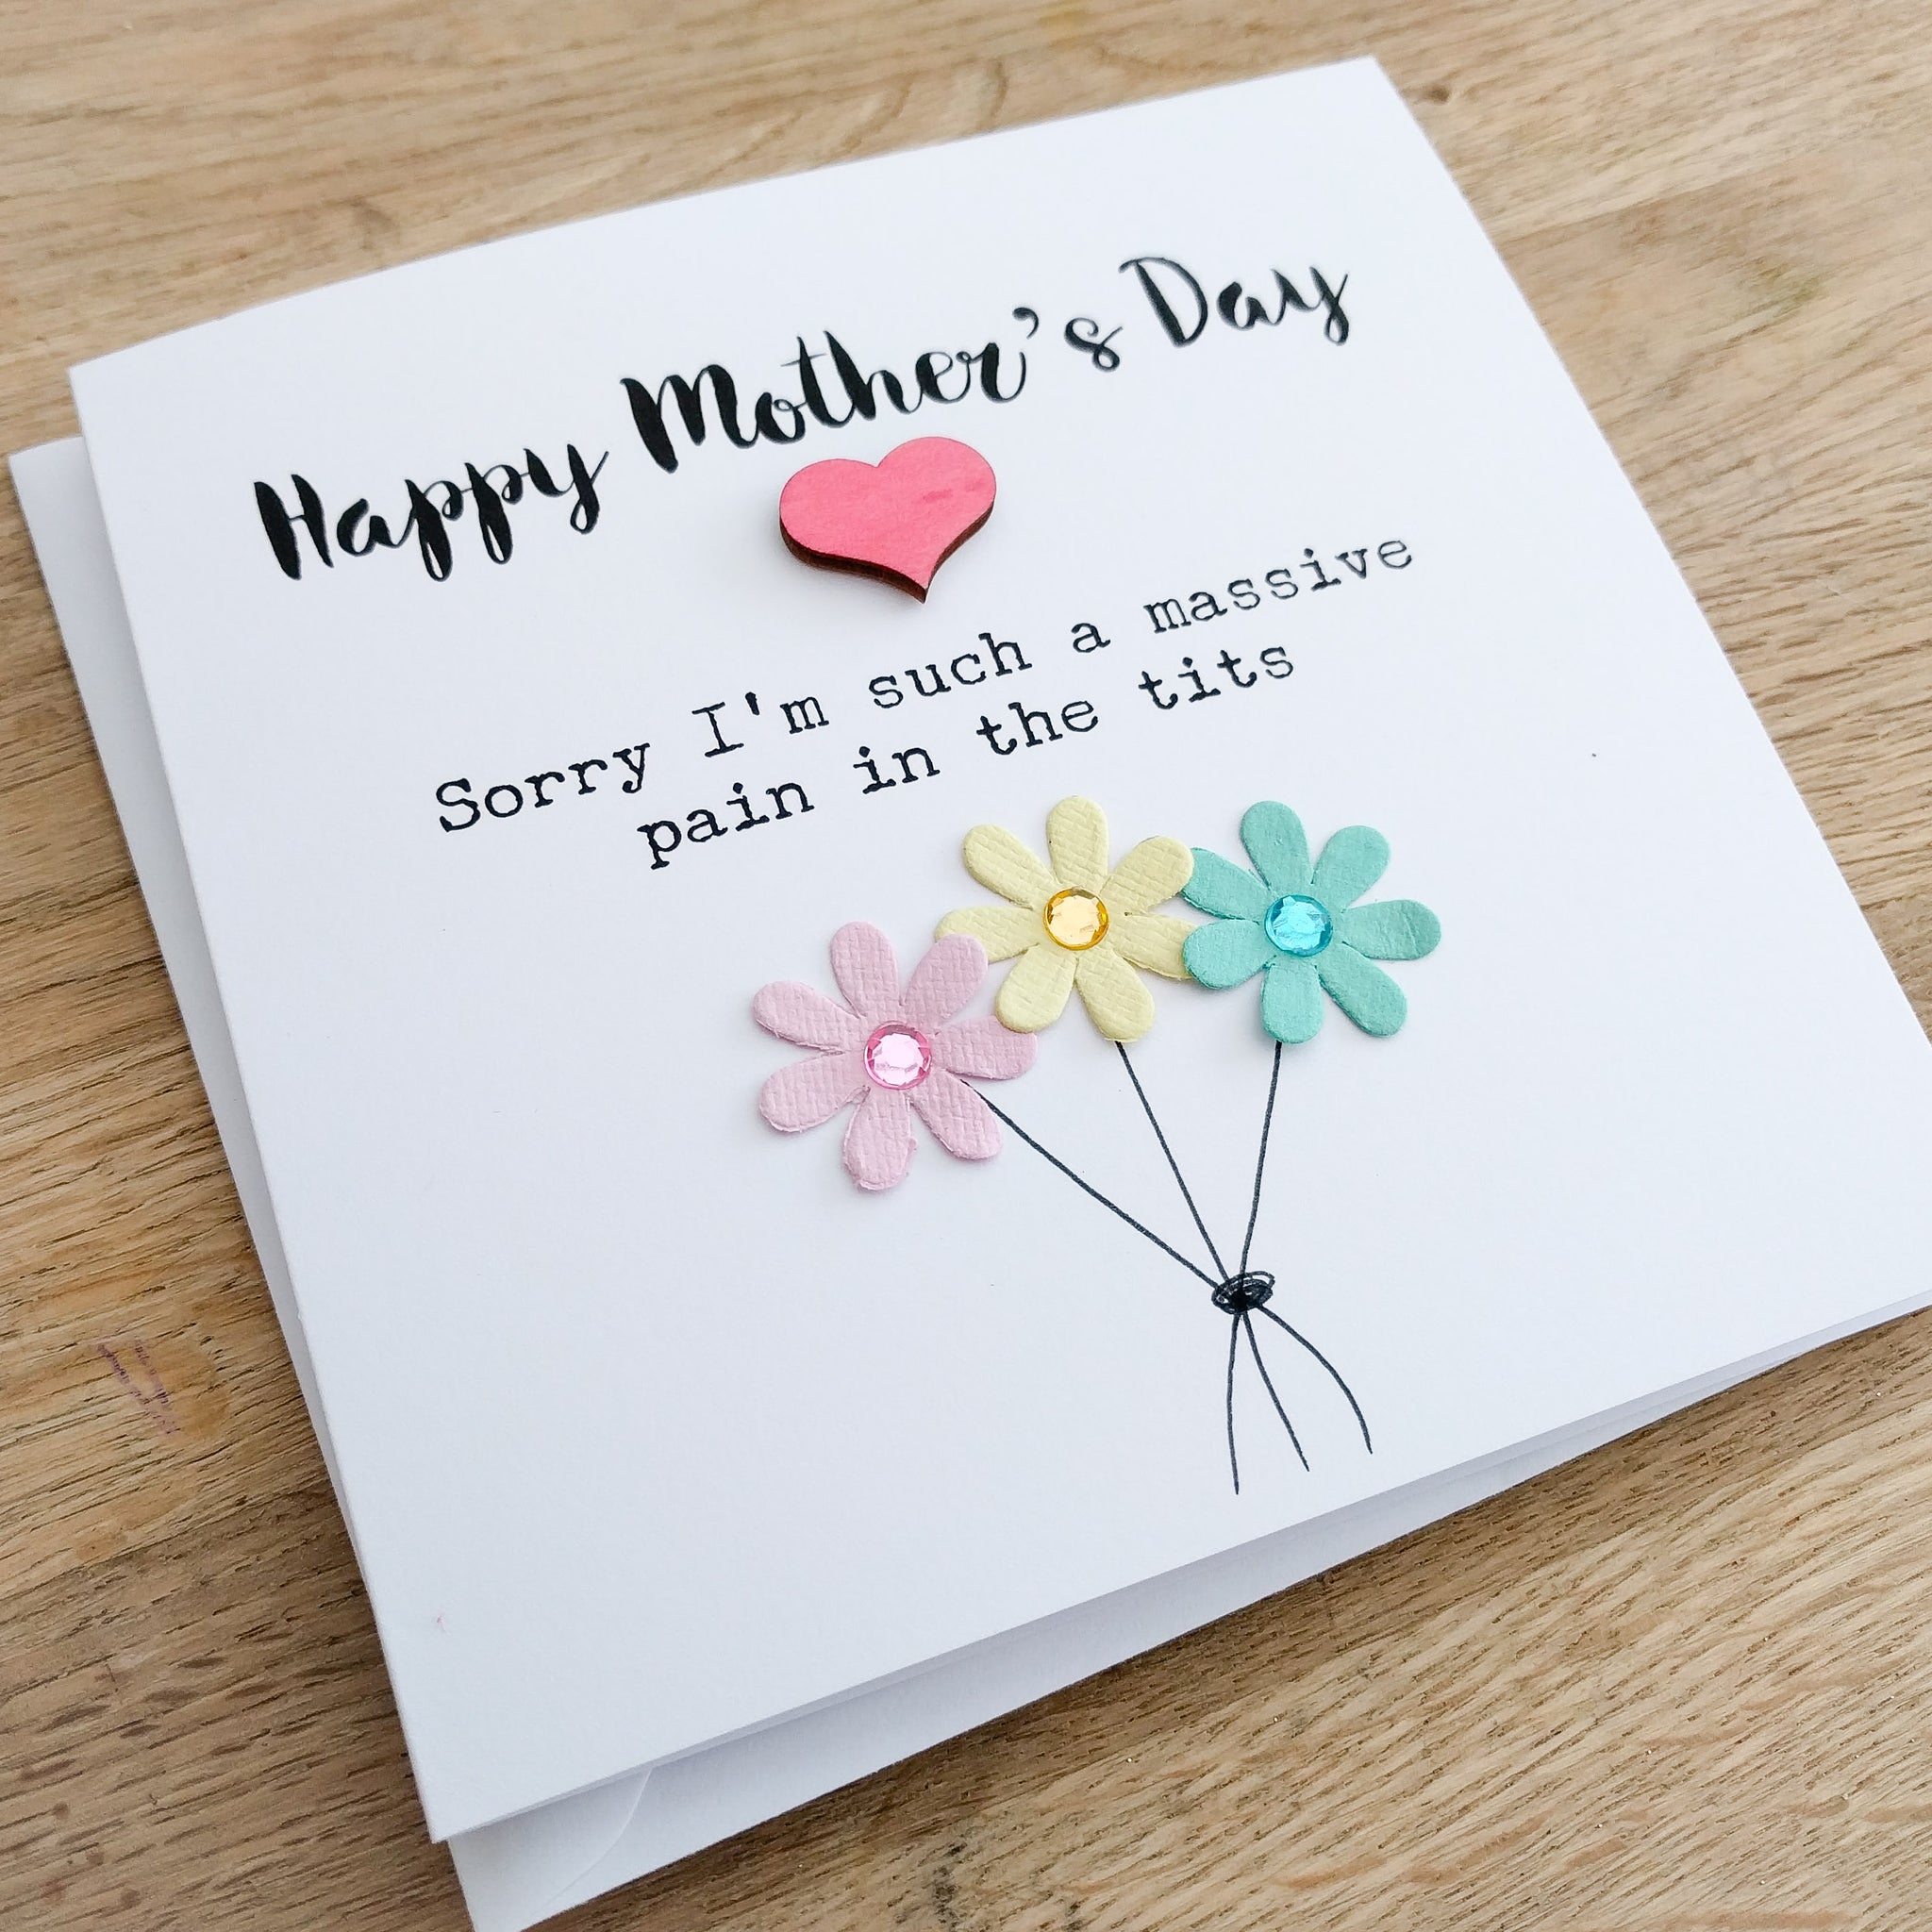 Funny rude handmade "Sorry I'm such a pain in the tits" Mother's Day card